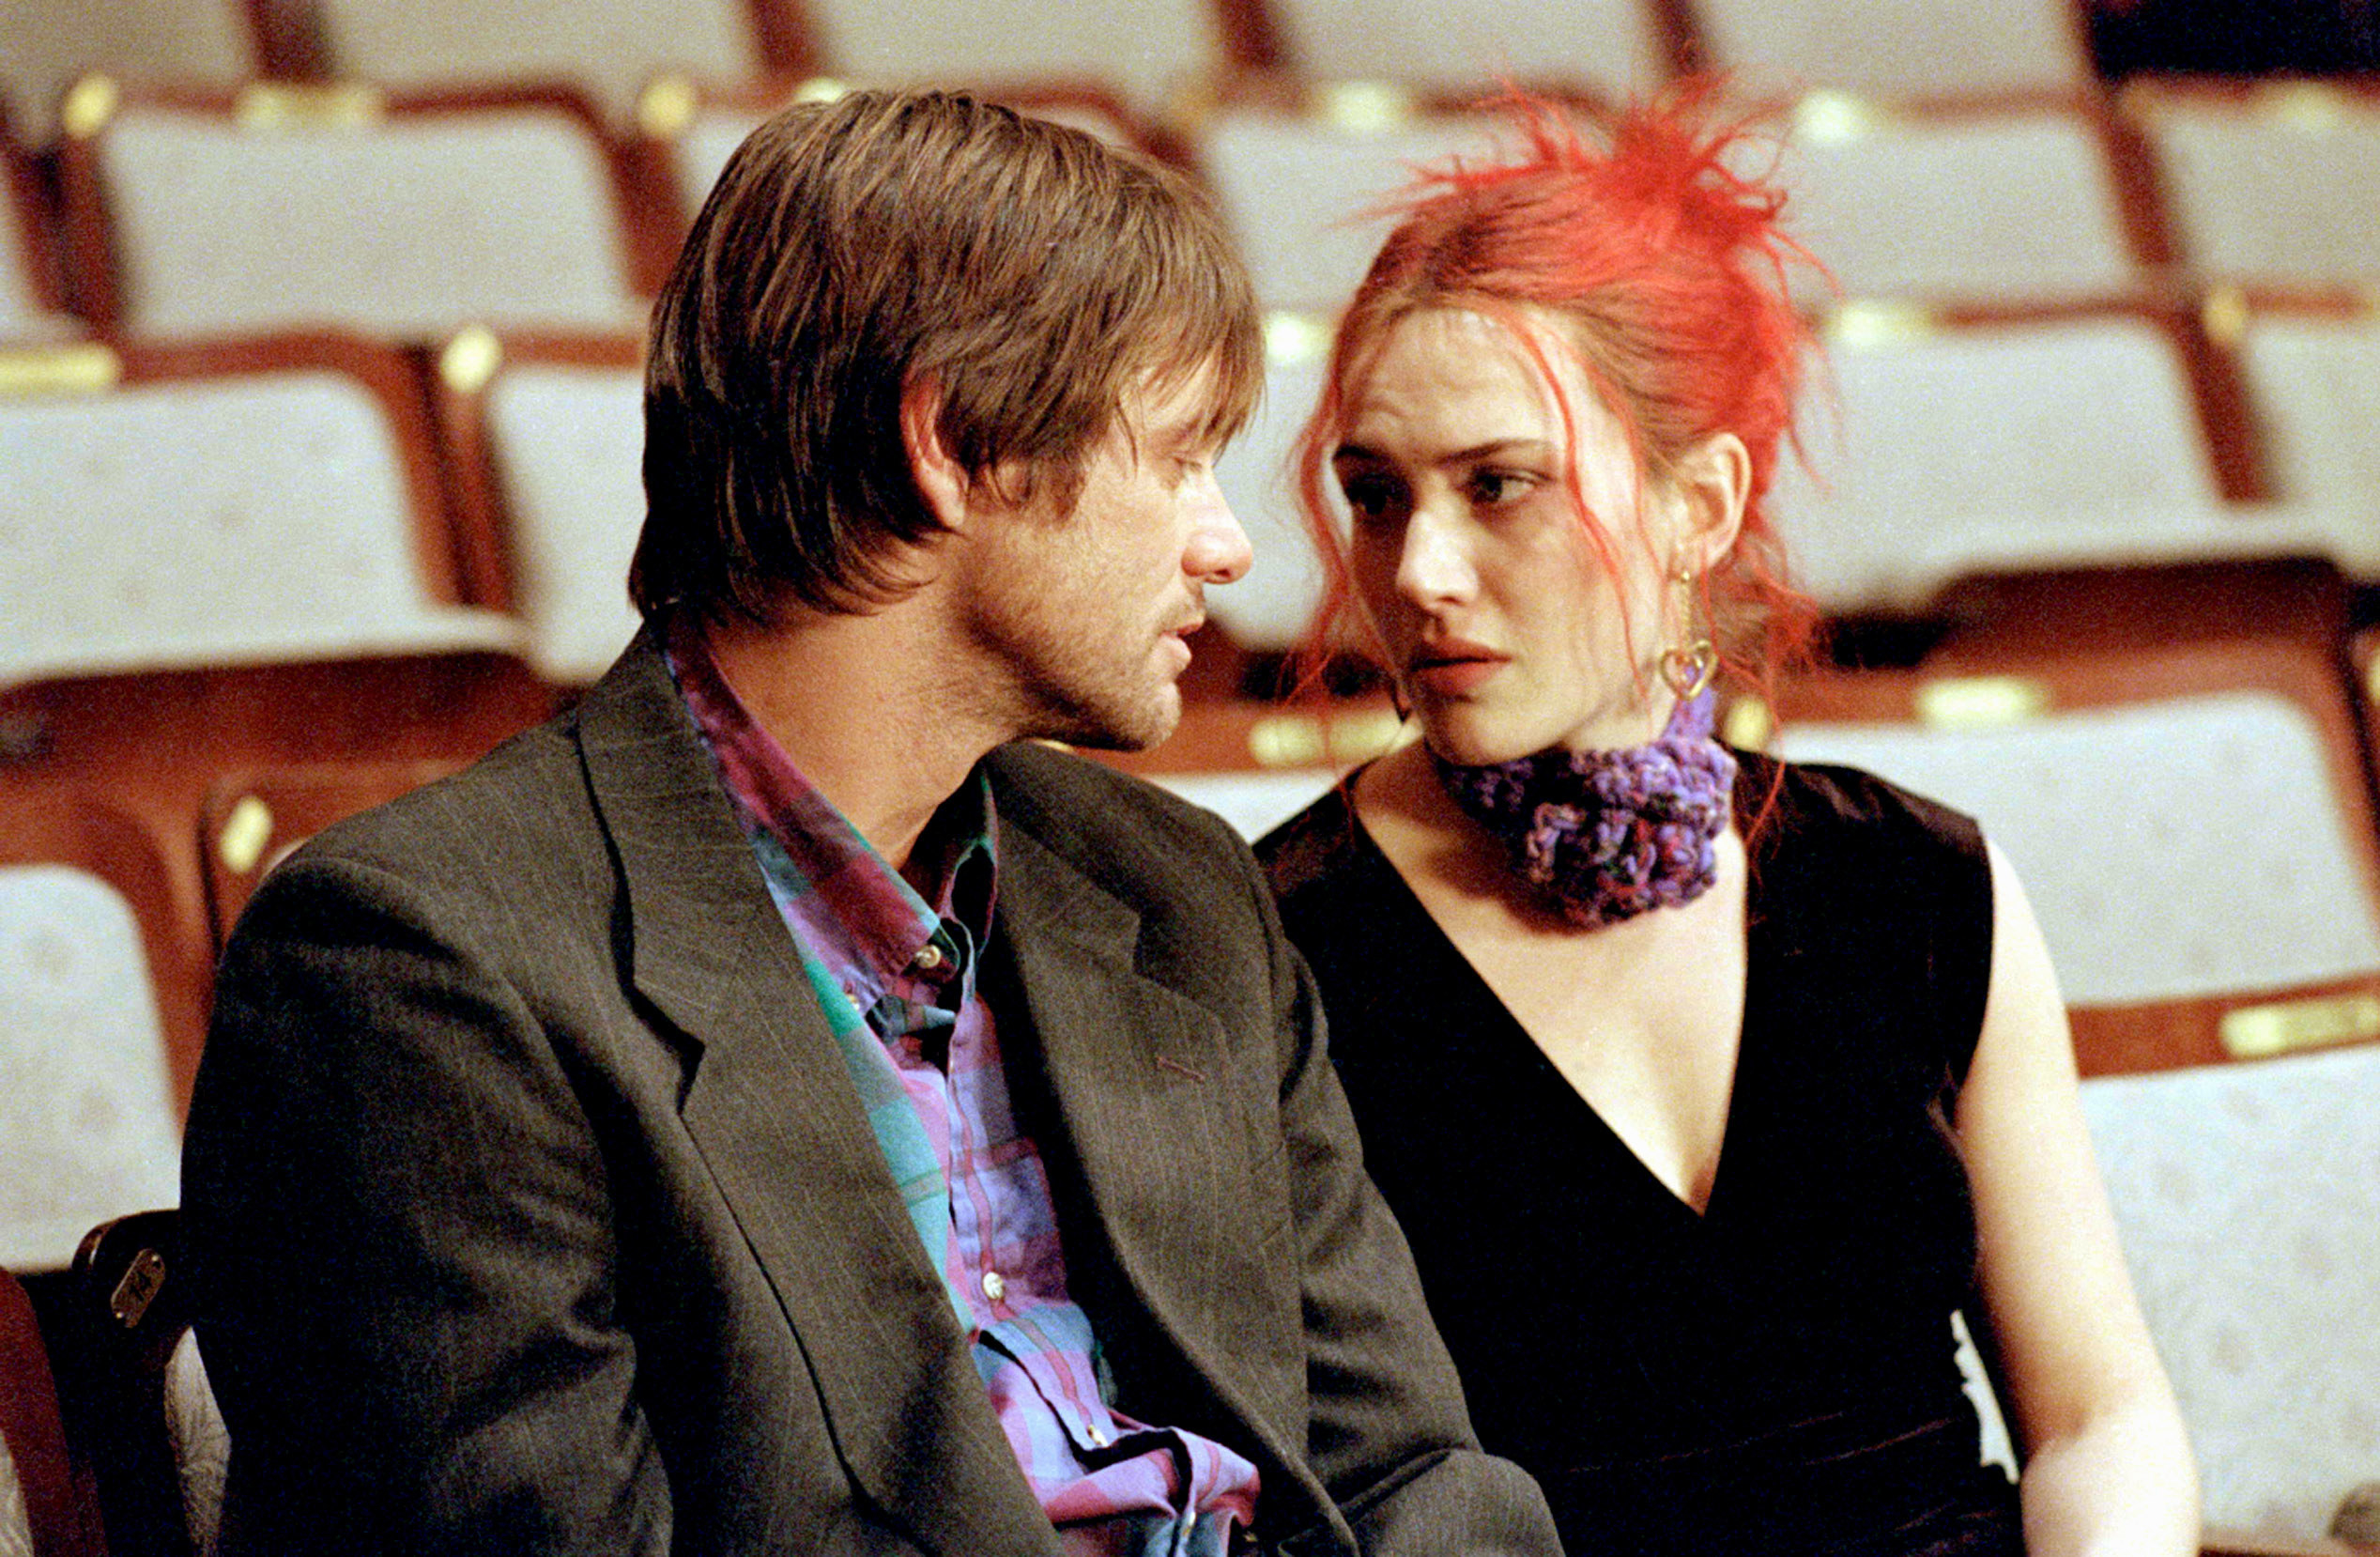 Jim Carrey and Kate Winslet sit in seats together